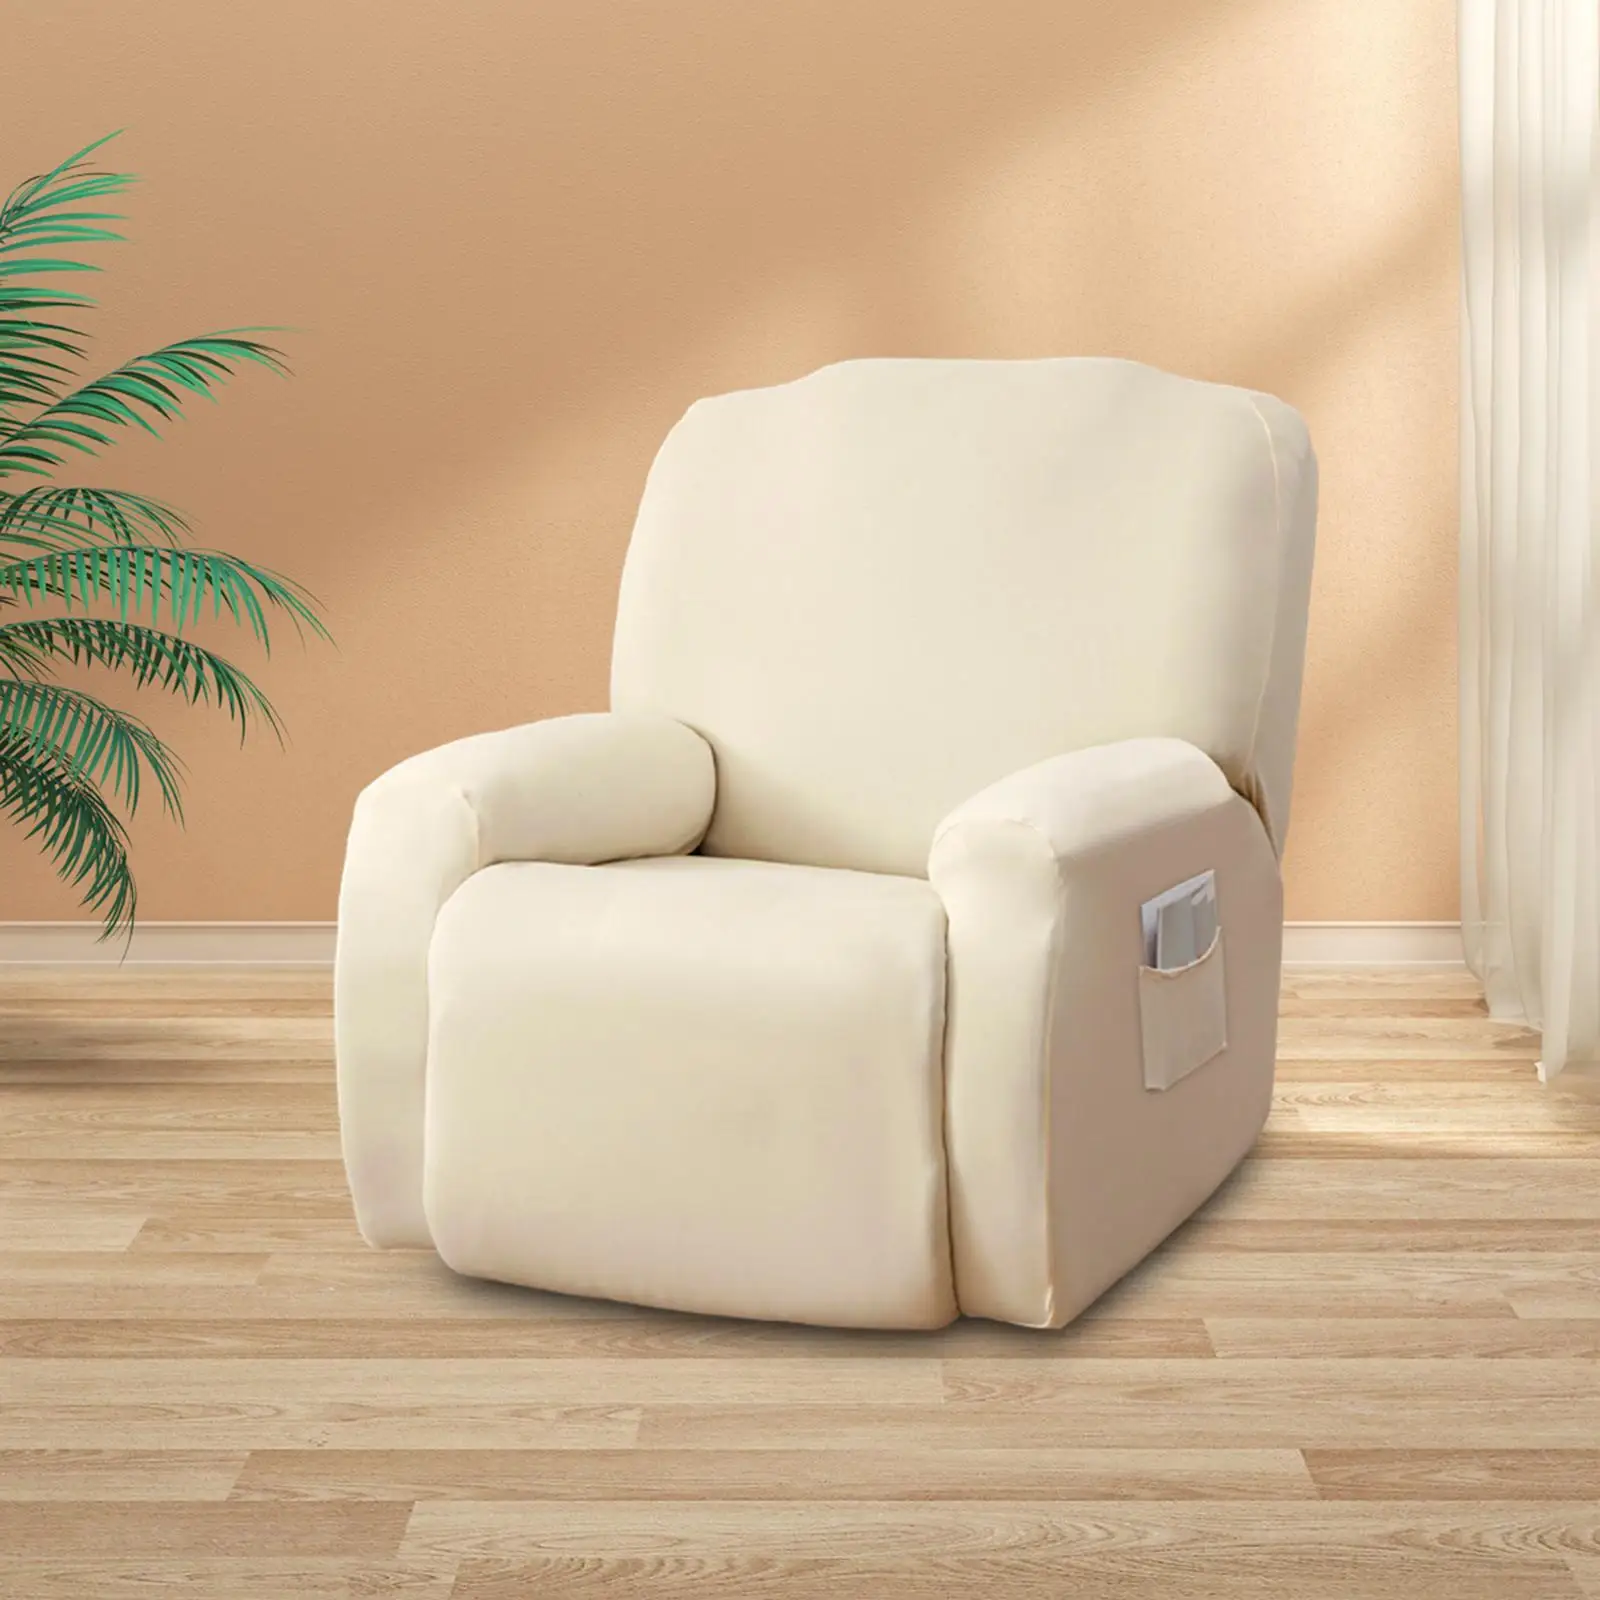 recliner Chair Covers Modern Reclining Chair Slipcovers Sofa Slipcovers for Ceremony Wedding Banquet